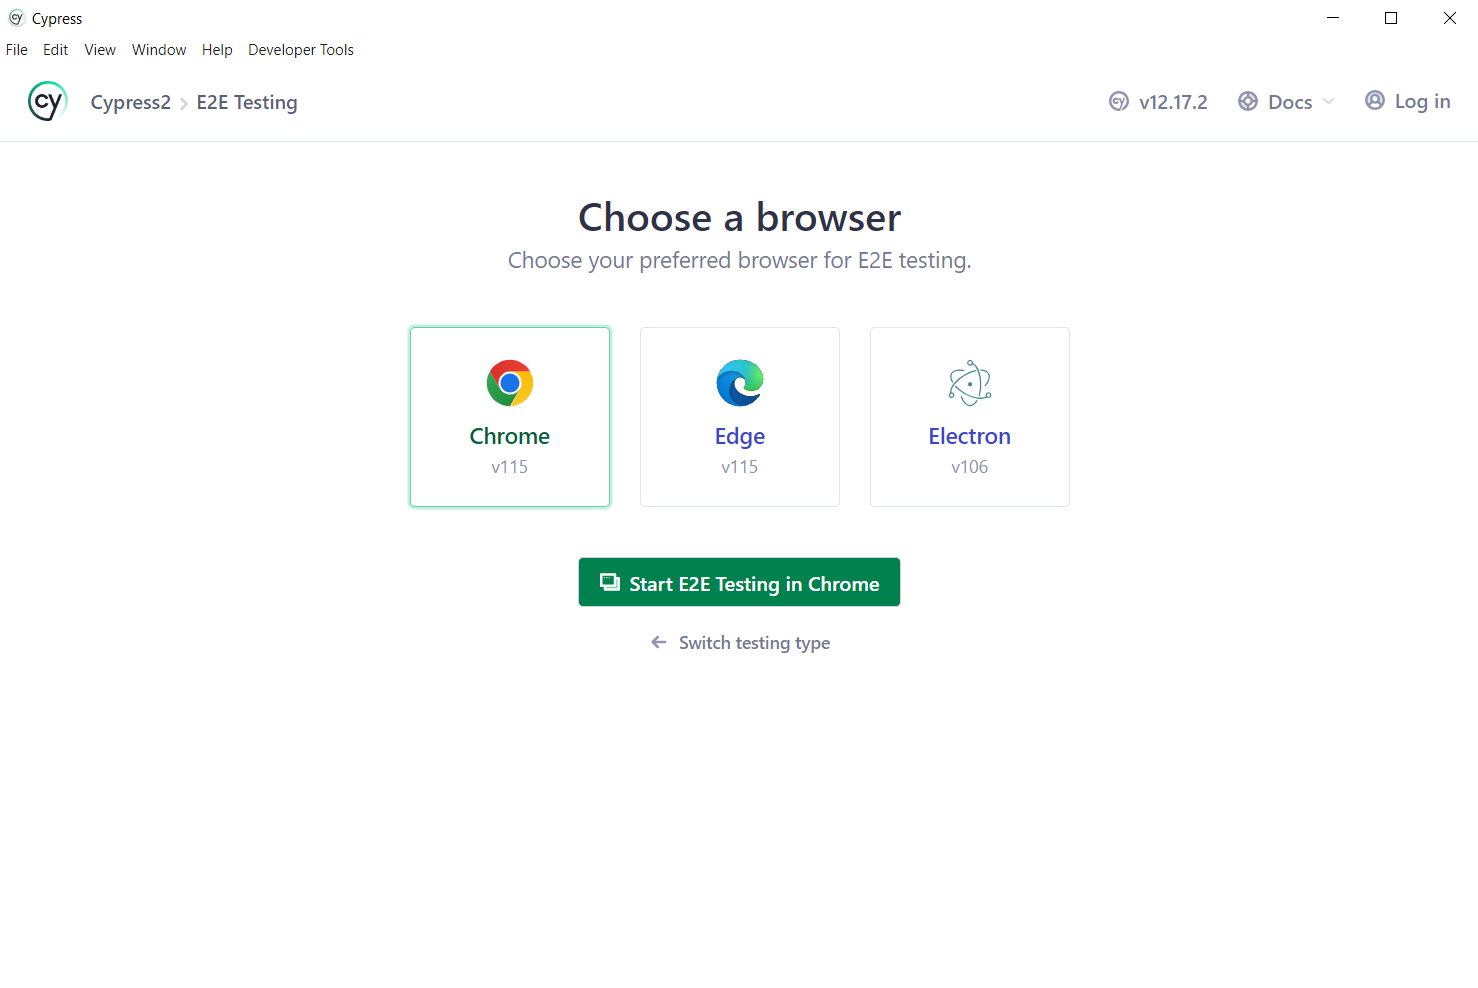  browser for E2E testing and